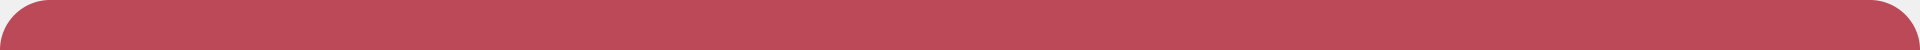 wall-to-wall-rounded-top-border-red